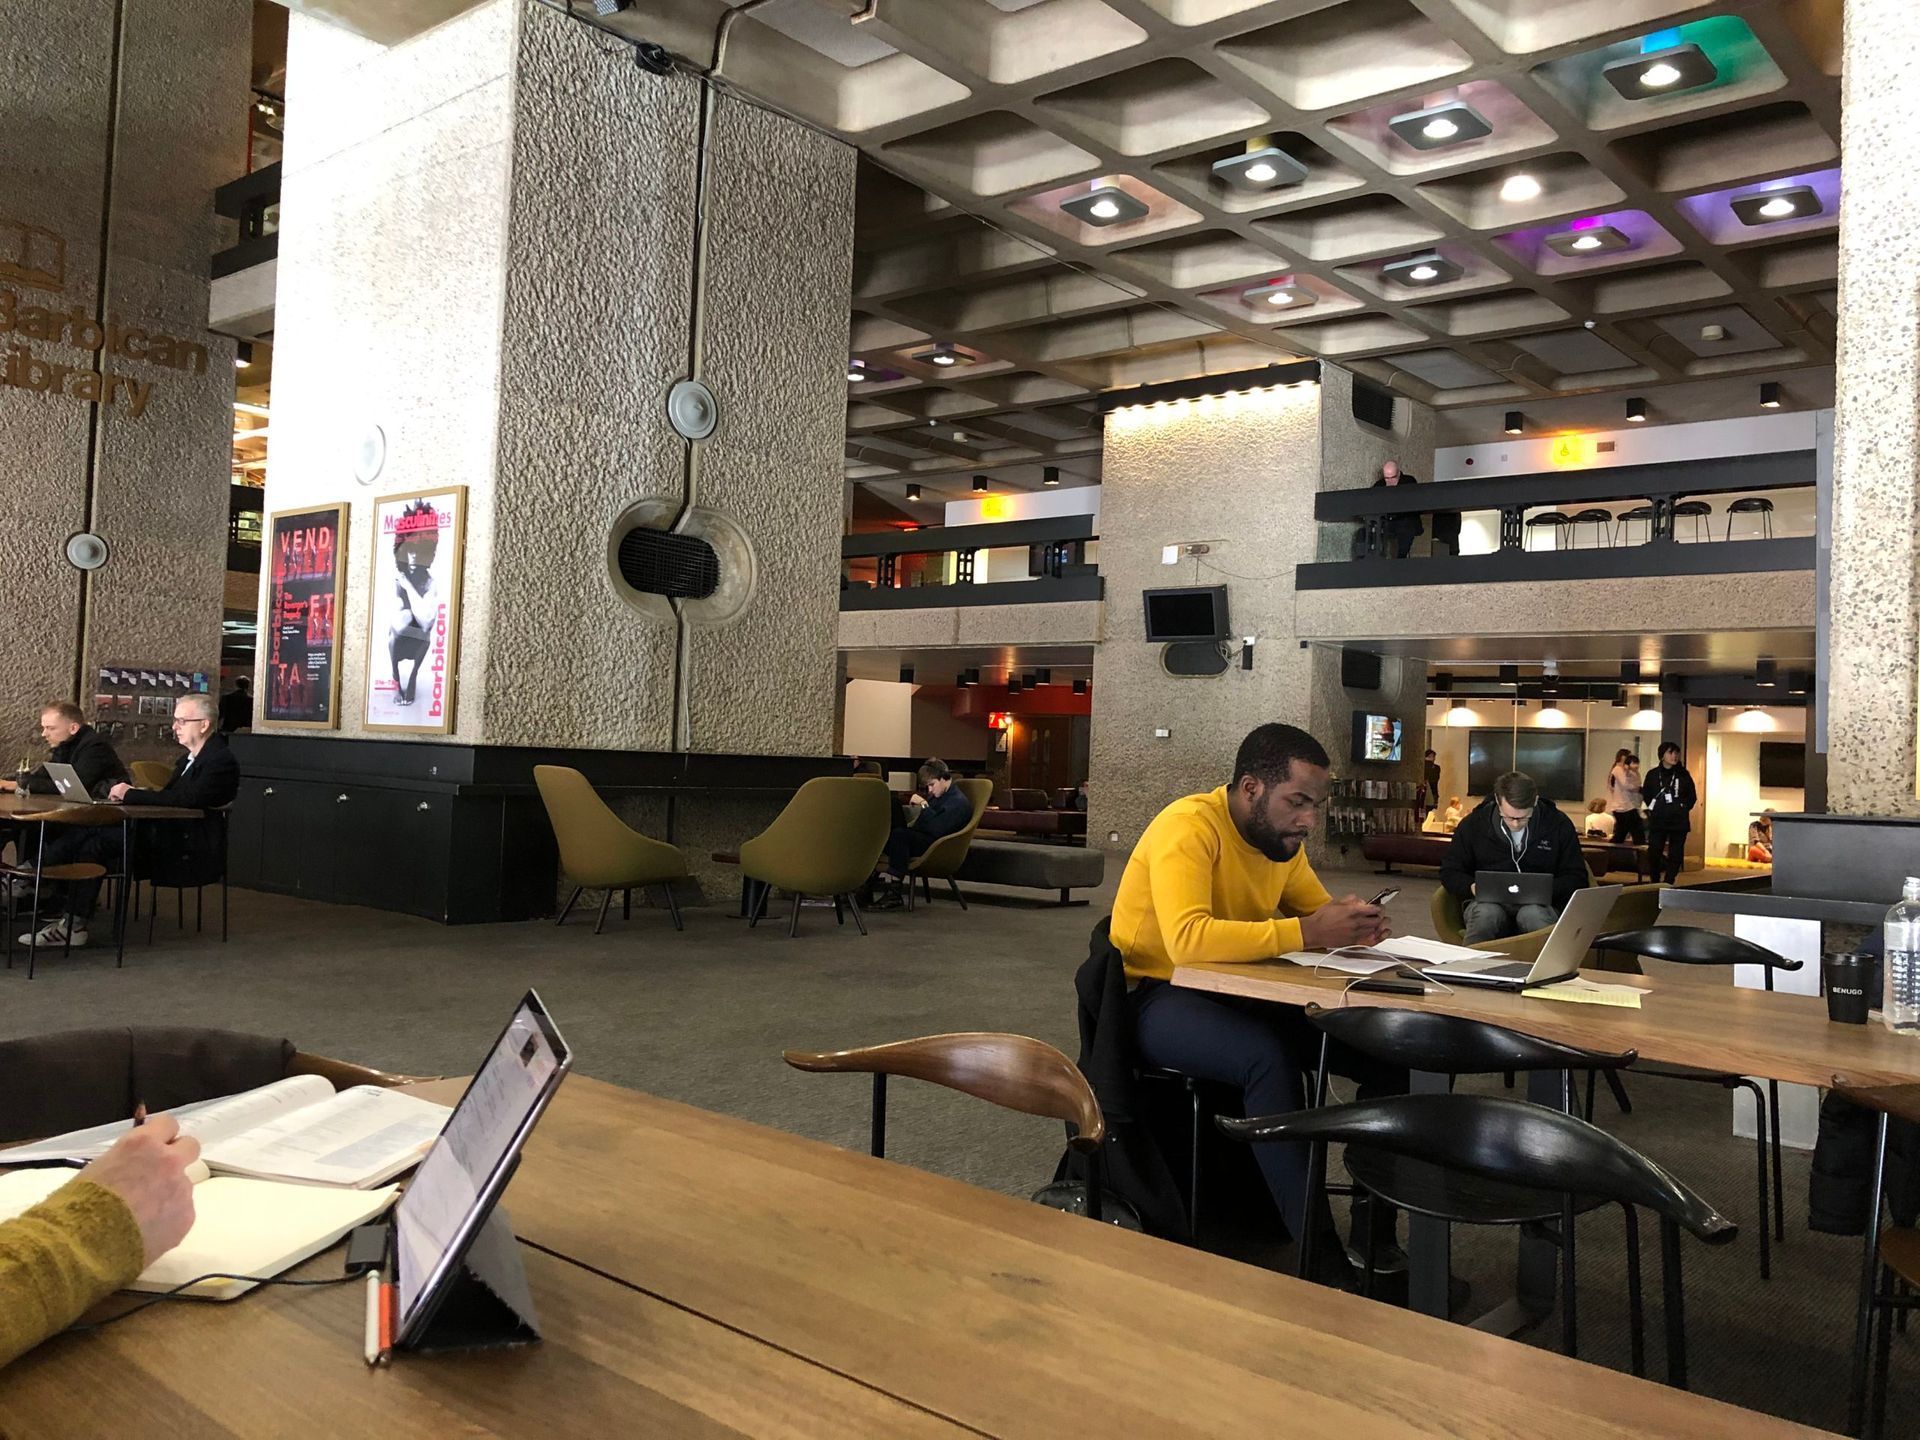 A large boxy granate hall, people work on laptops and drink coffee in the hall and on a mezzanine balcony above. Stylish furniture of different types. From long communal tables to arty armchairs to coffee counters stools.